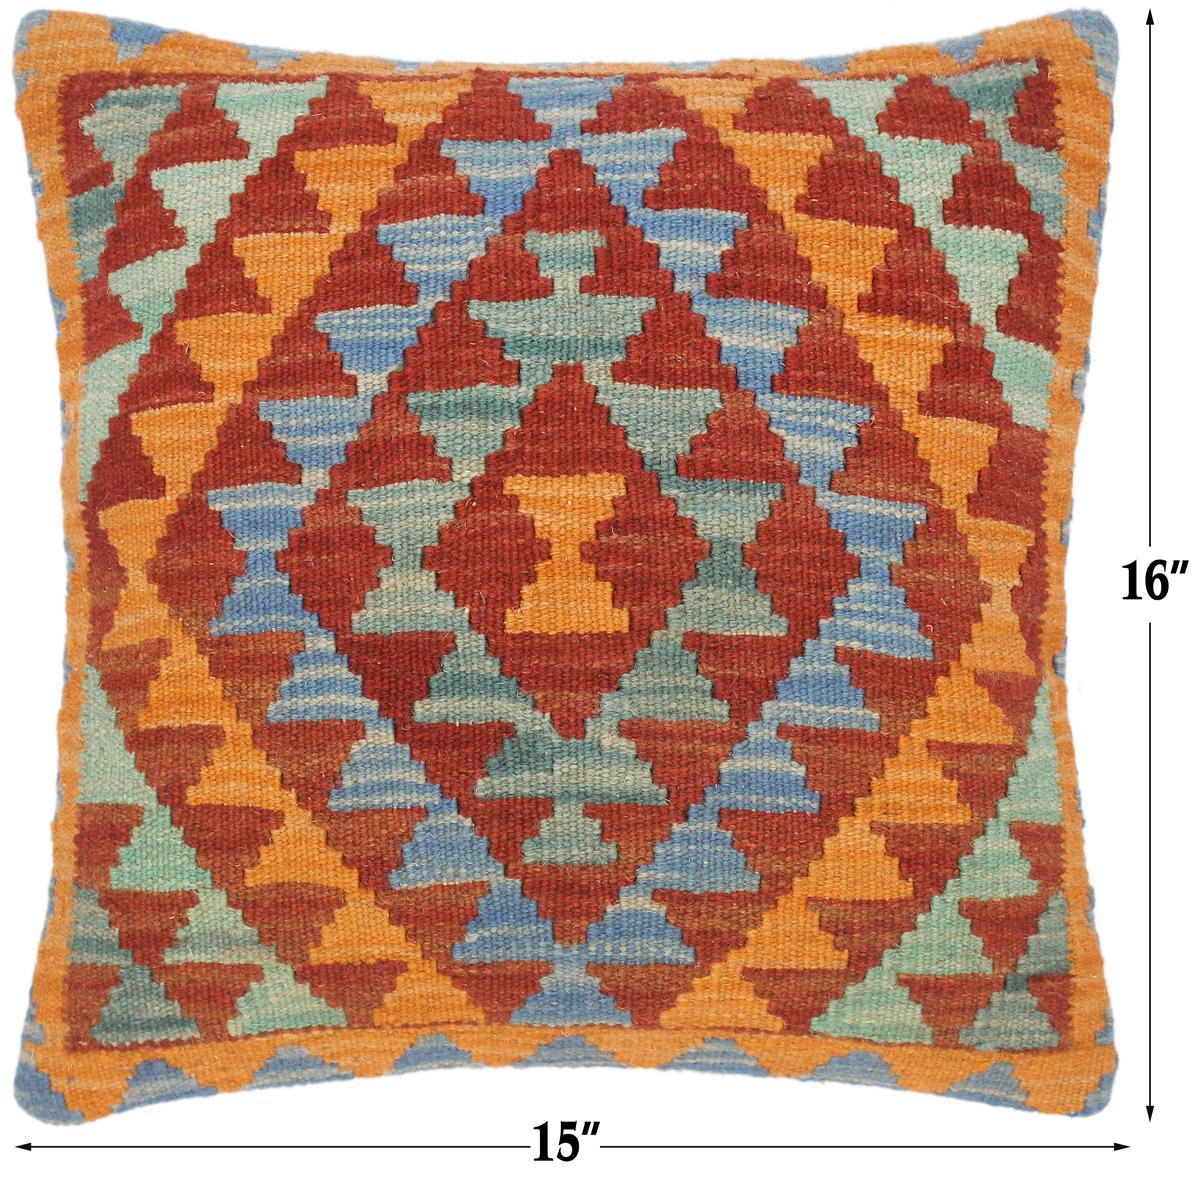 handmade Traditional Pillow Orange Brown Hand-Woven SQUARE 100% WOOL area rug